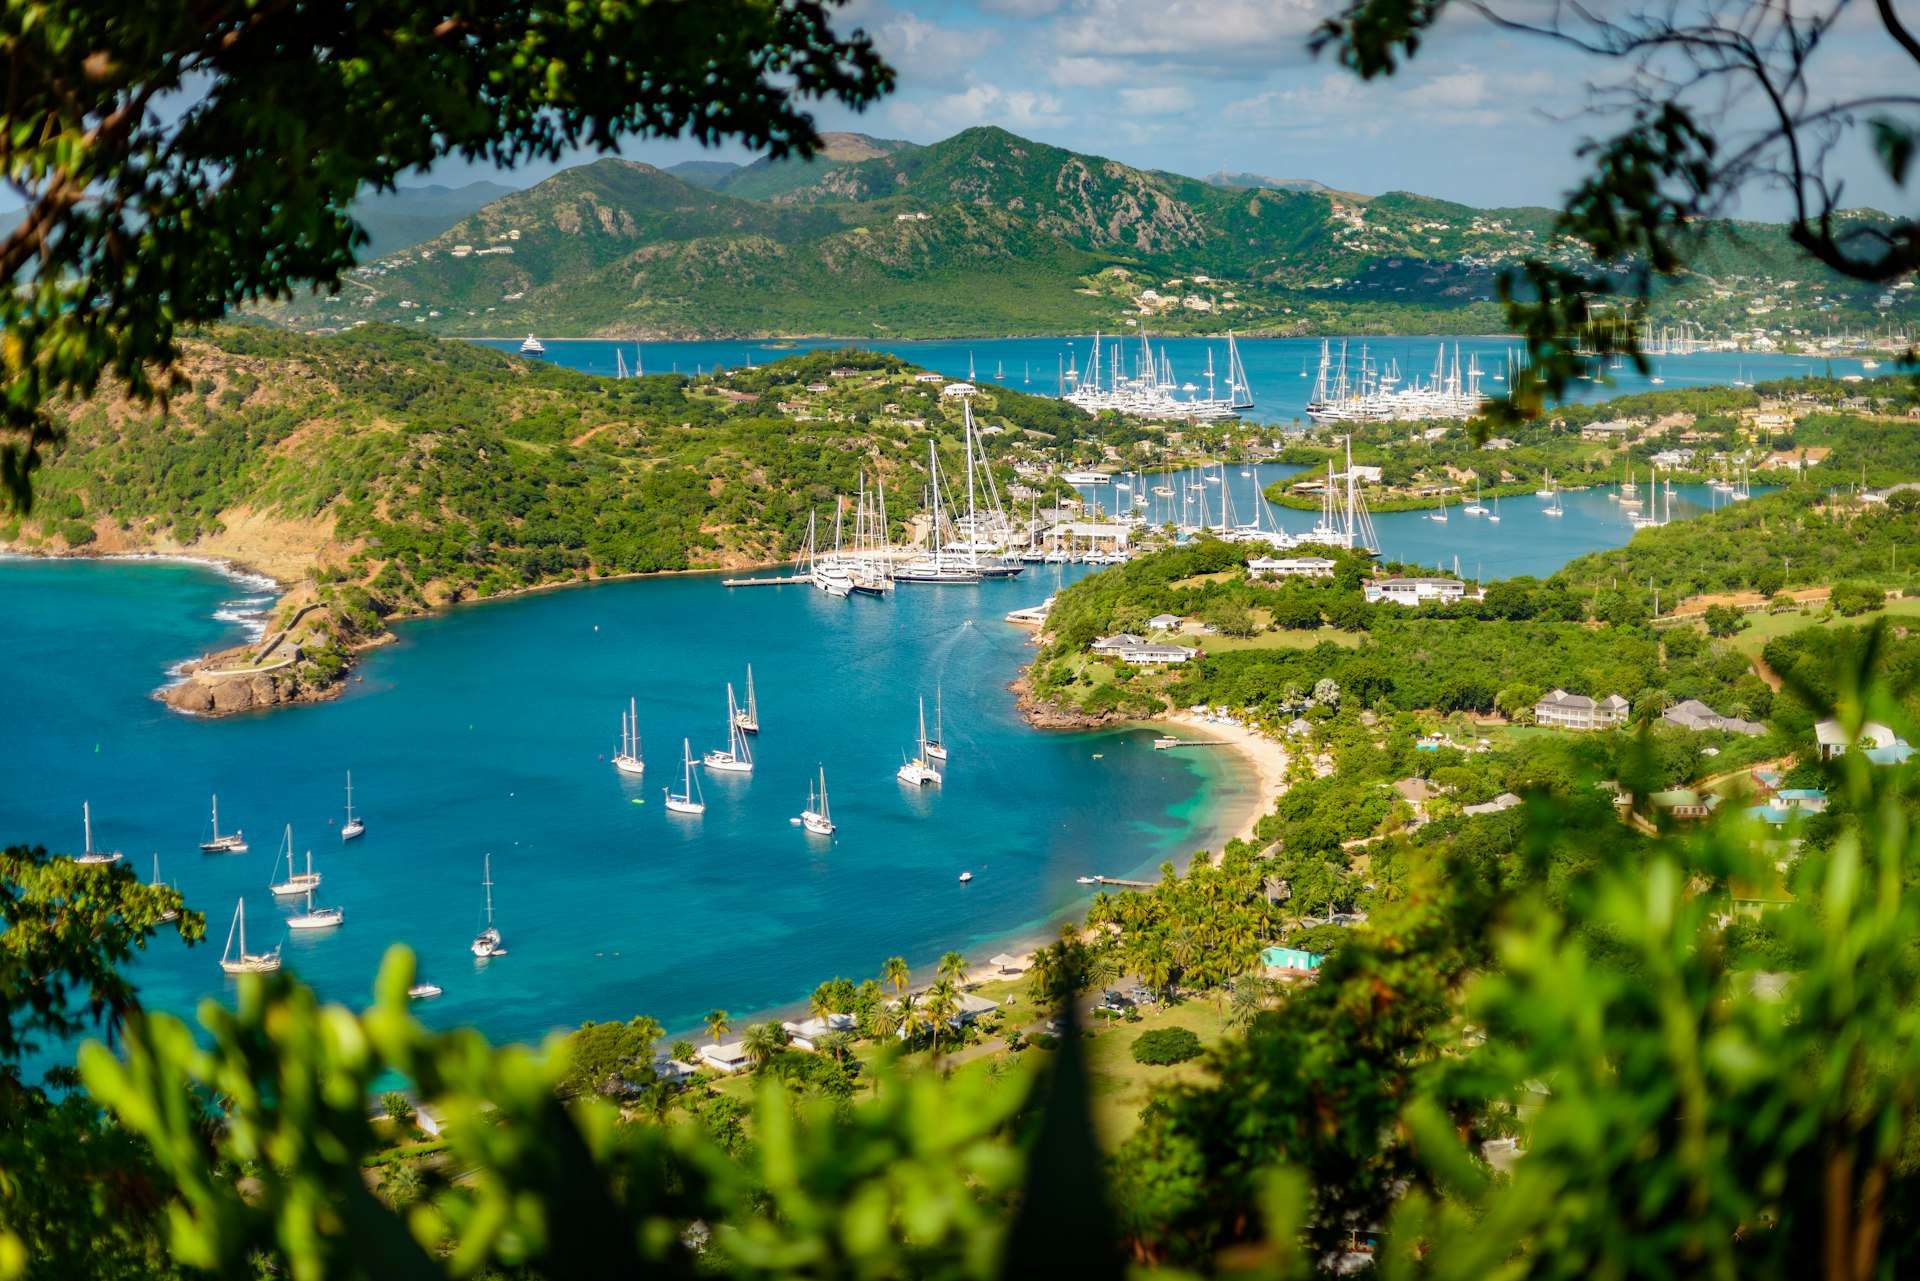 Looking down on a harbor with boats, framed by greenery and mountains in the distance